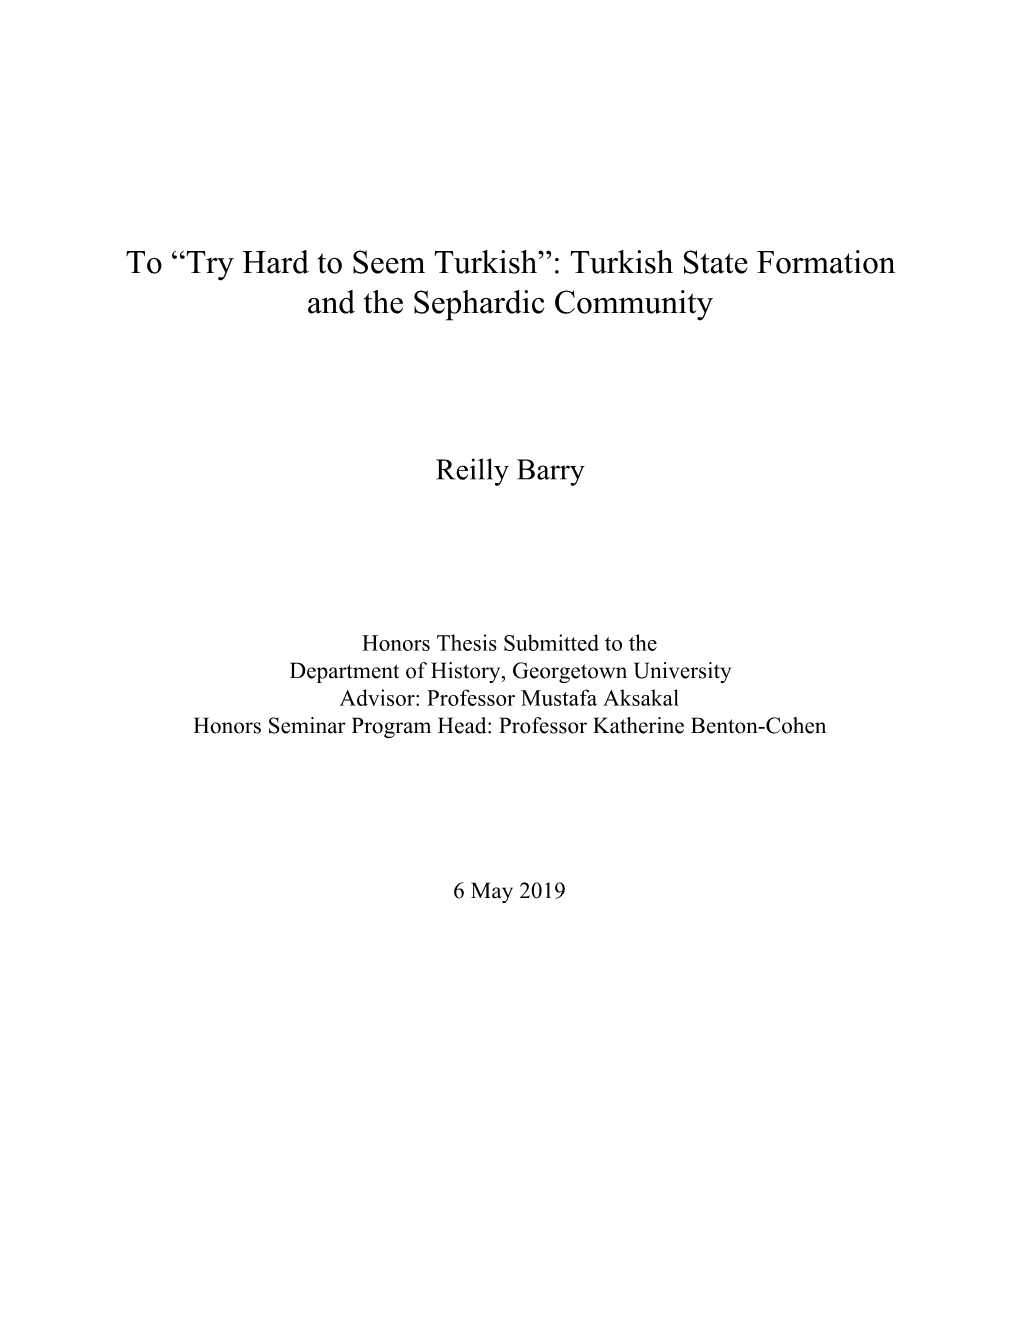 Turkish State Formation and the Sephardic Community